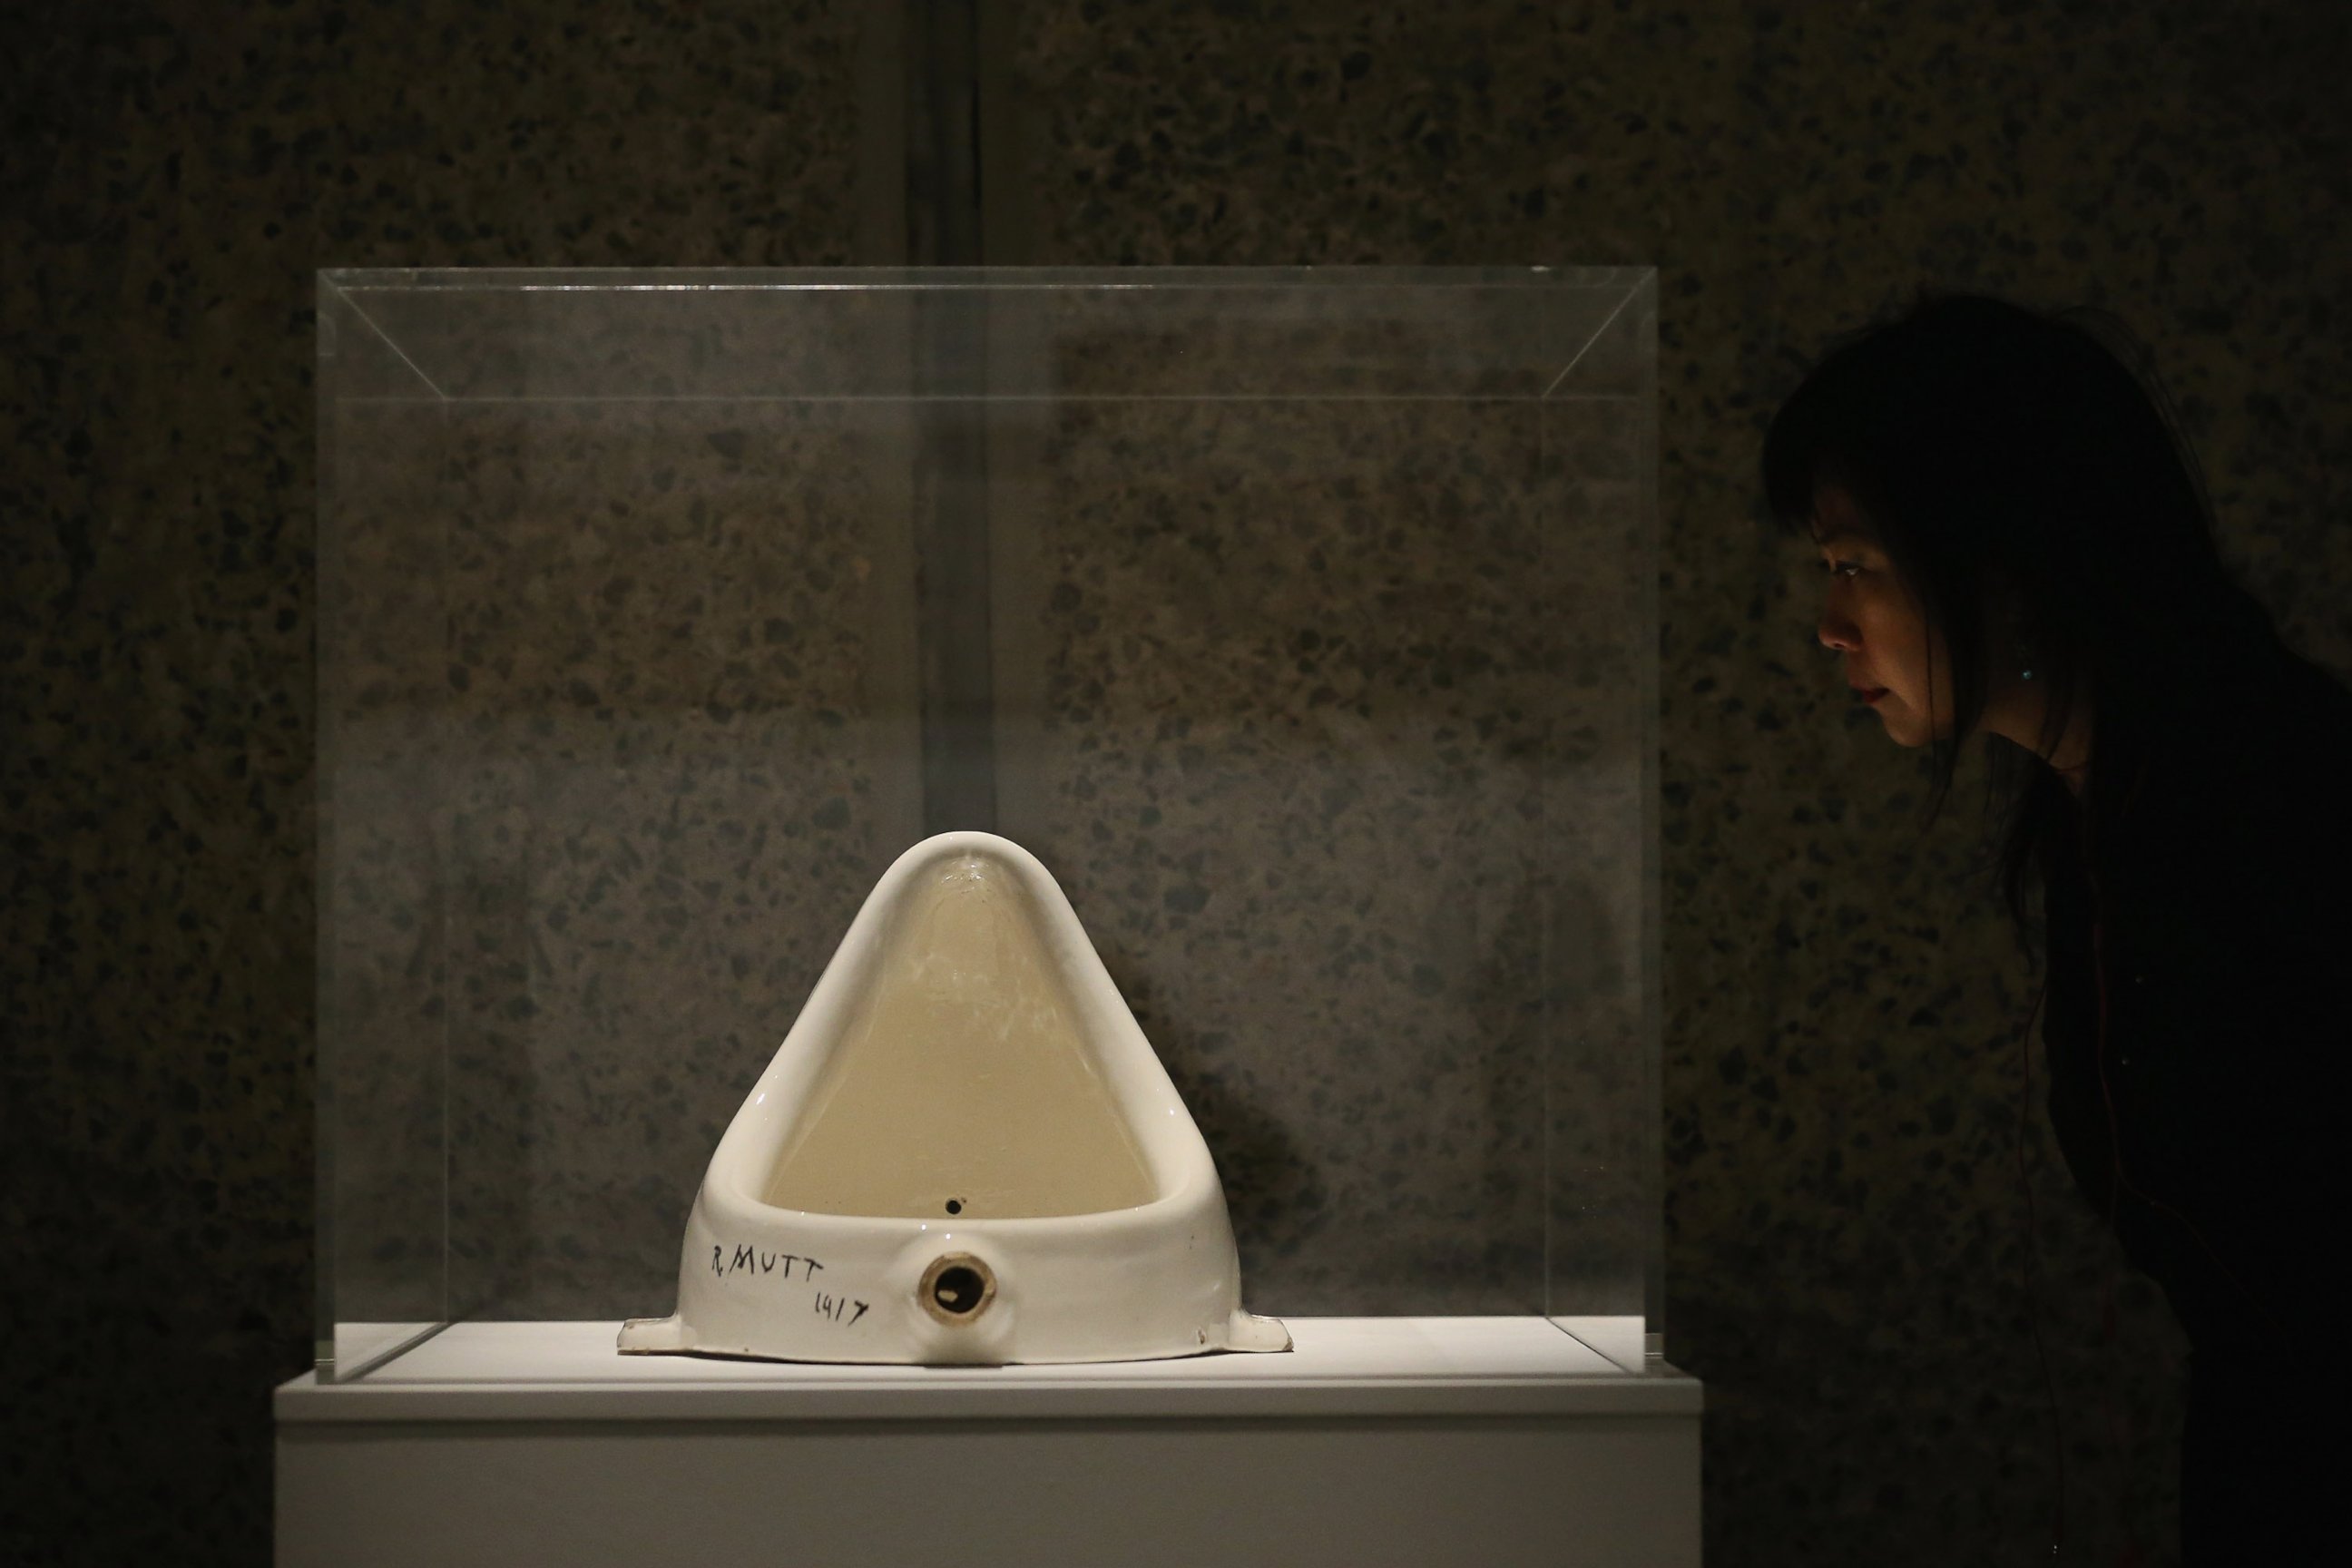 PHOTO: A woman looks at "Fountain" by Marcel Duchamp during a press preview of an exhibition at the Barbican Art Gallery on Feb. 13, 2013 in London.